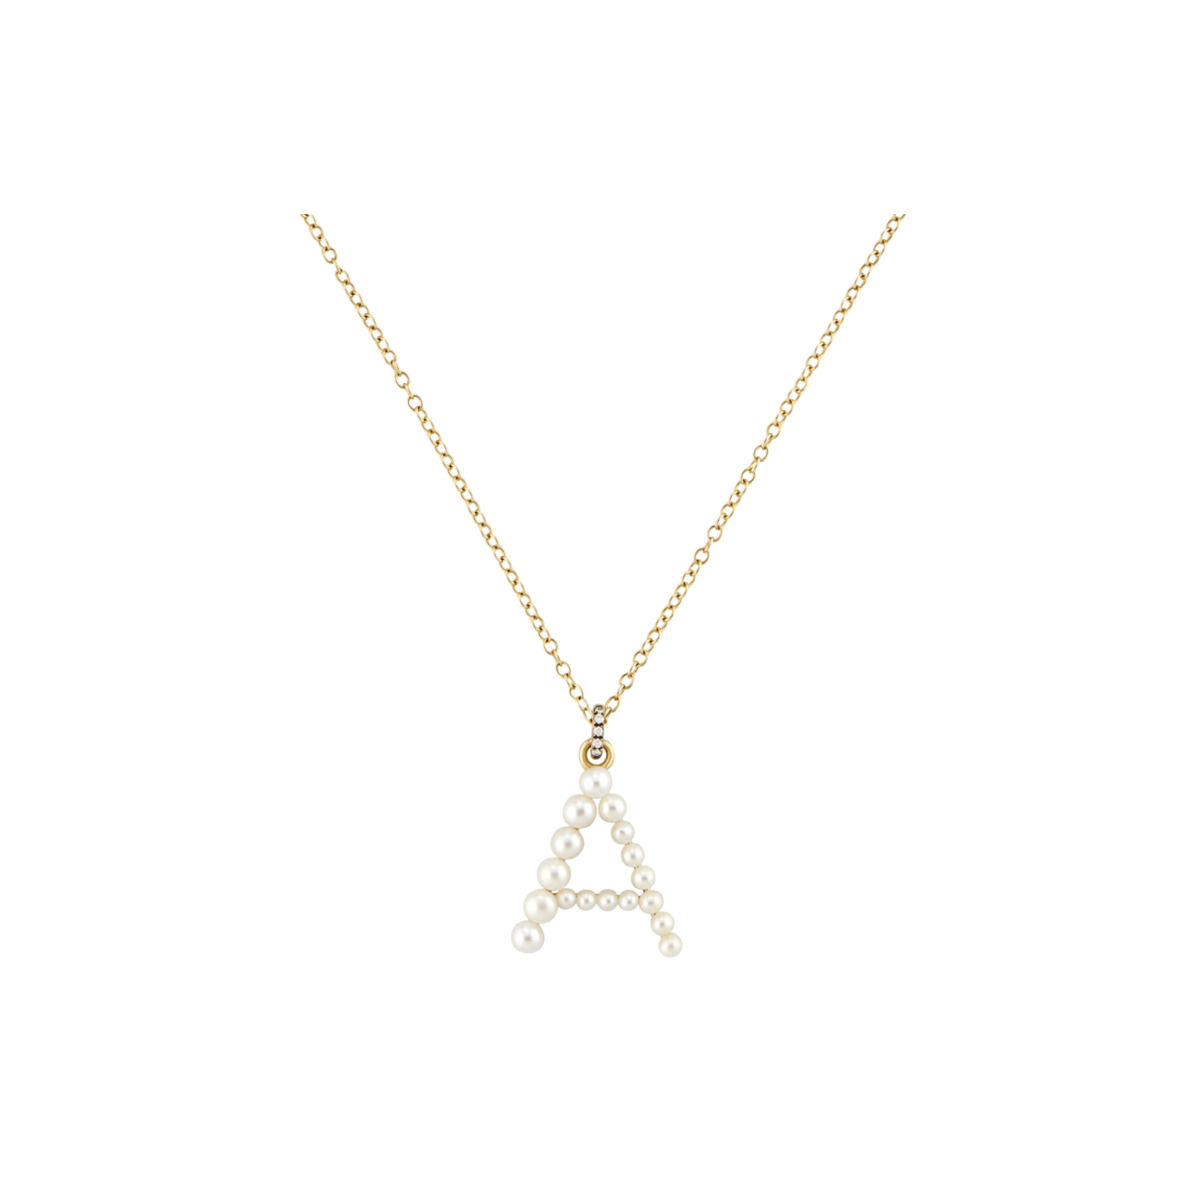 Jemma Wynne Yellow Gold Prive Pearl Letter Necklace